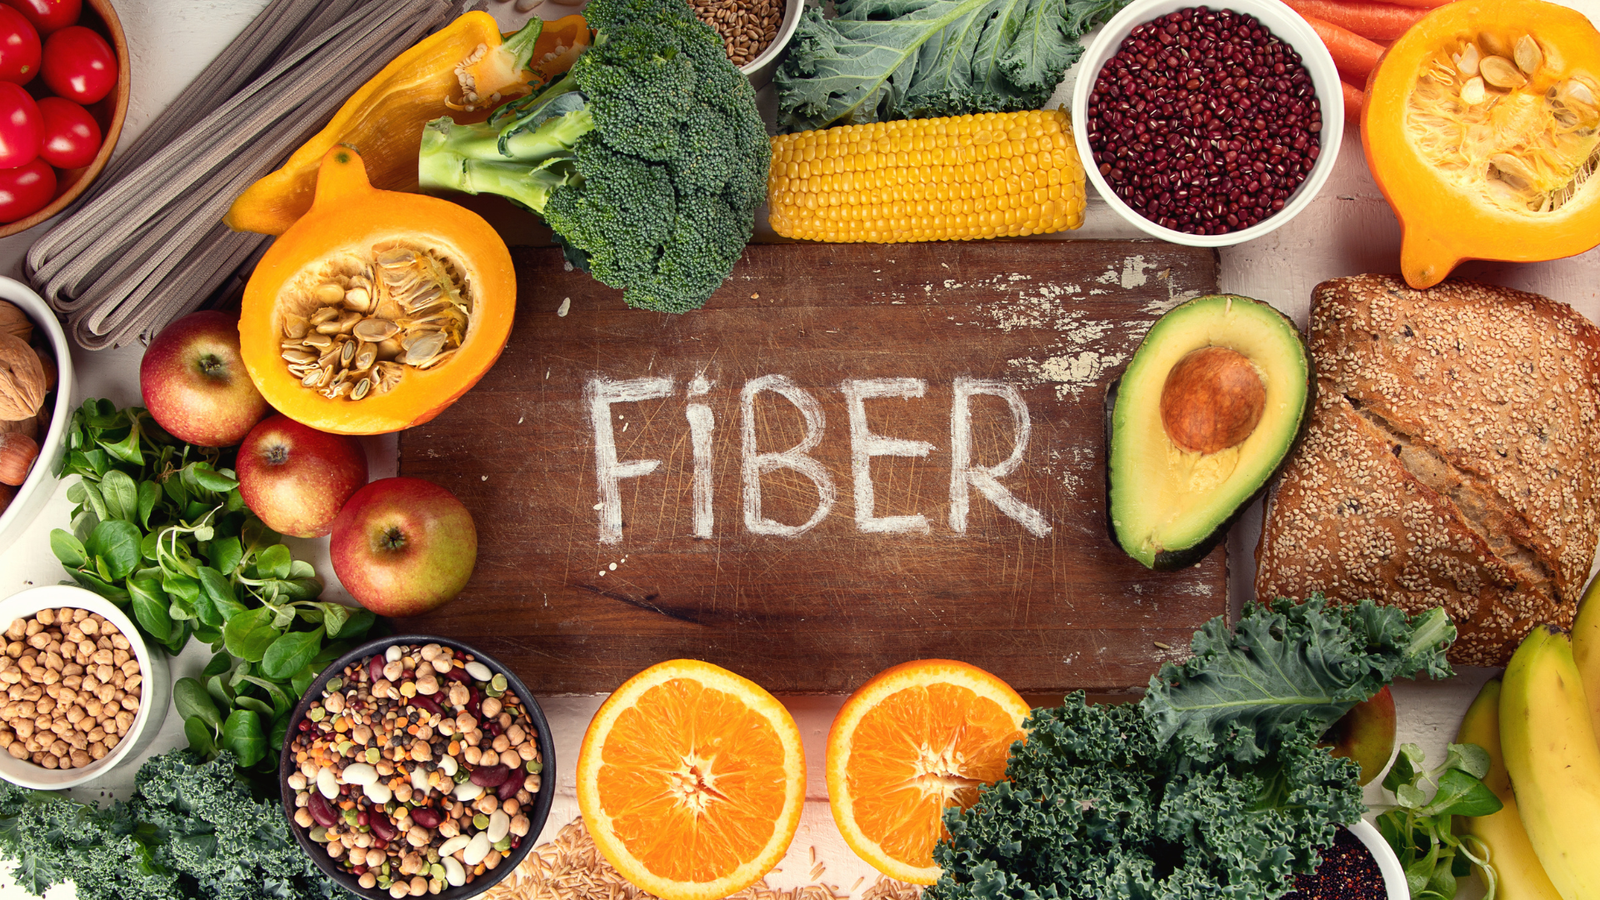 THE 10 BEST WAYS TO BOOST YOUR FIBER INTAKE